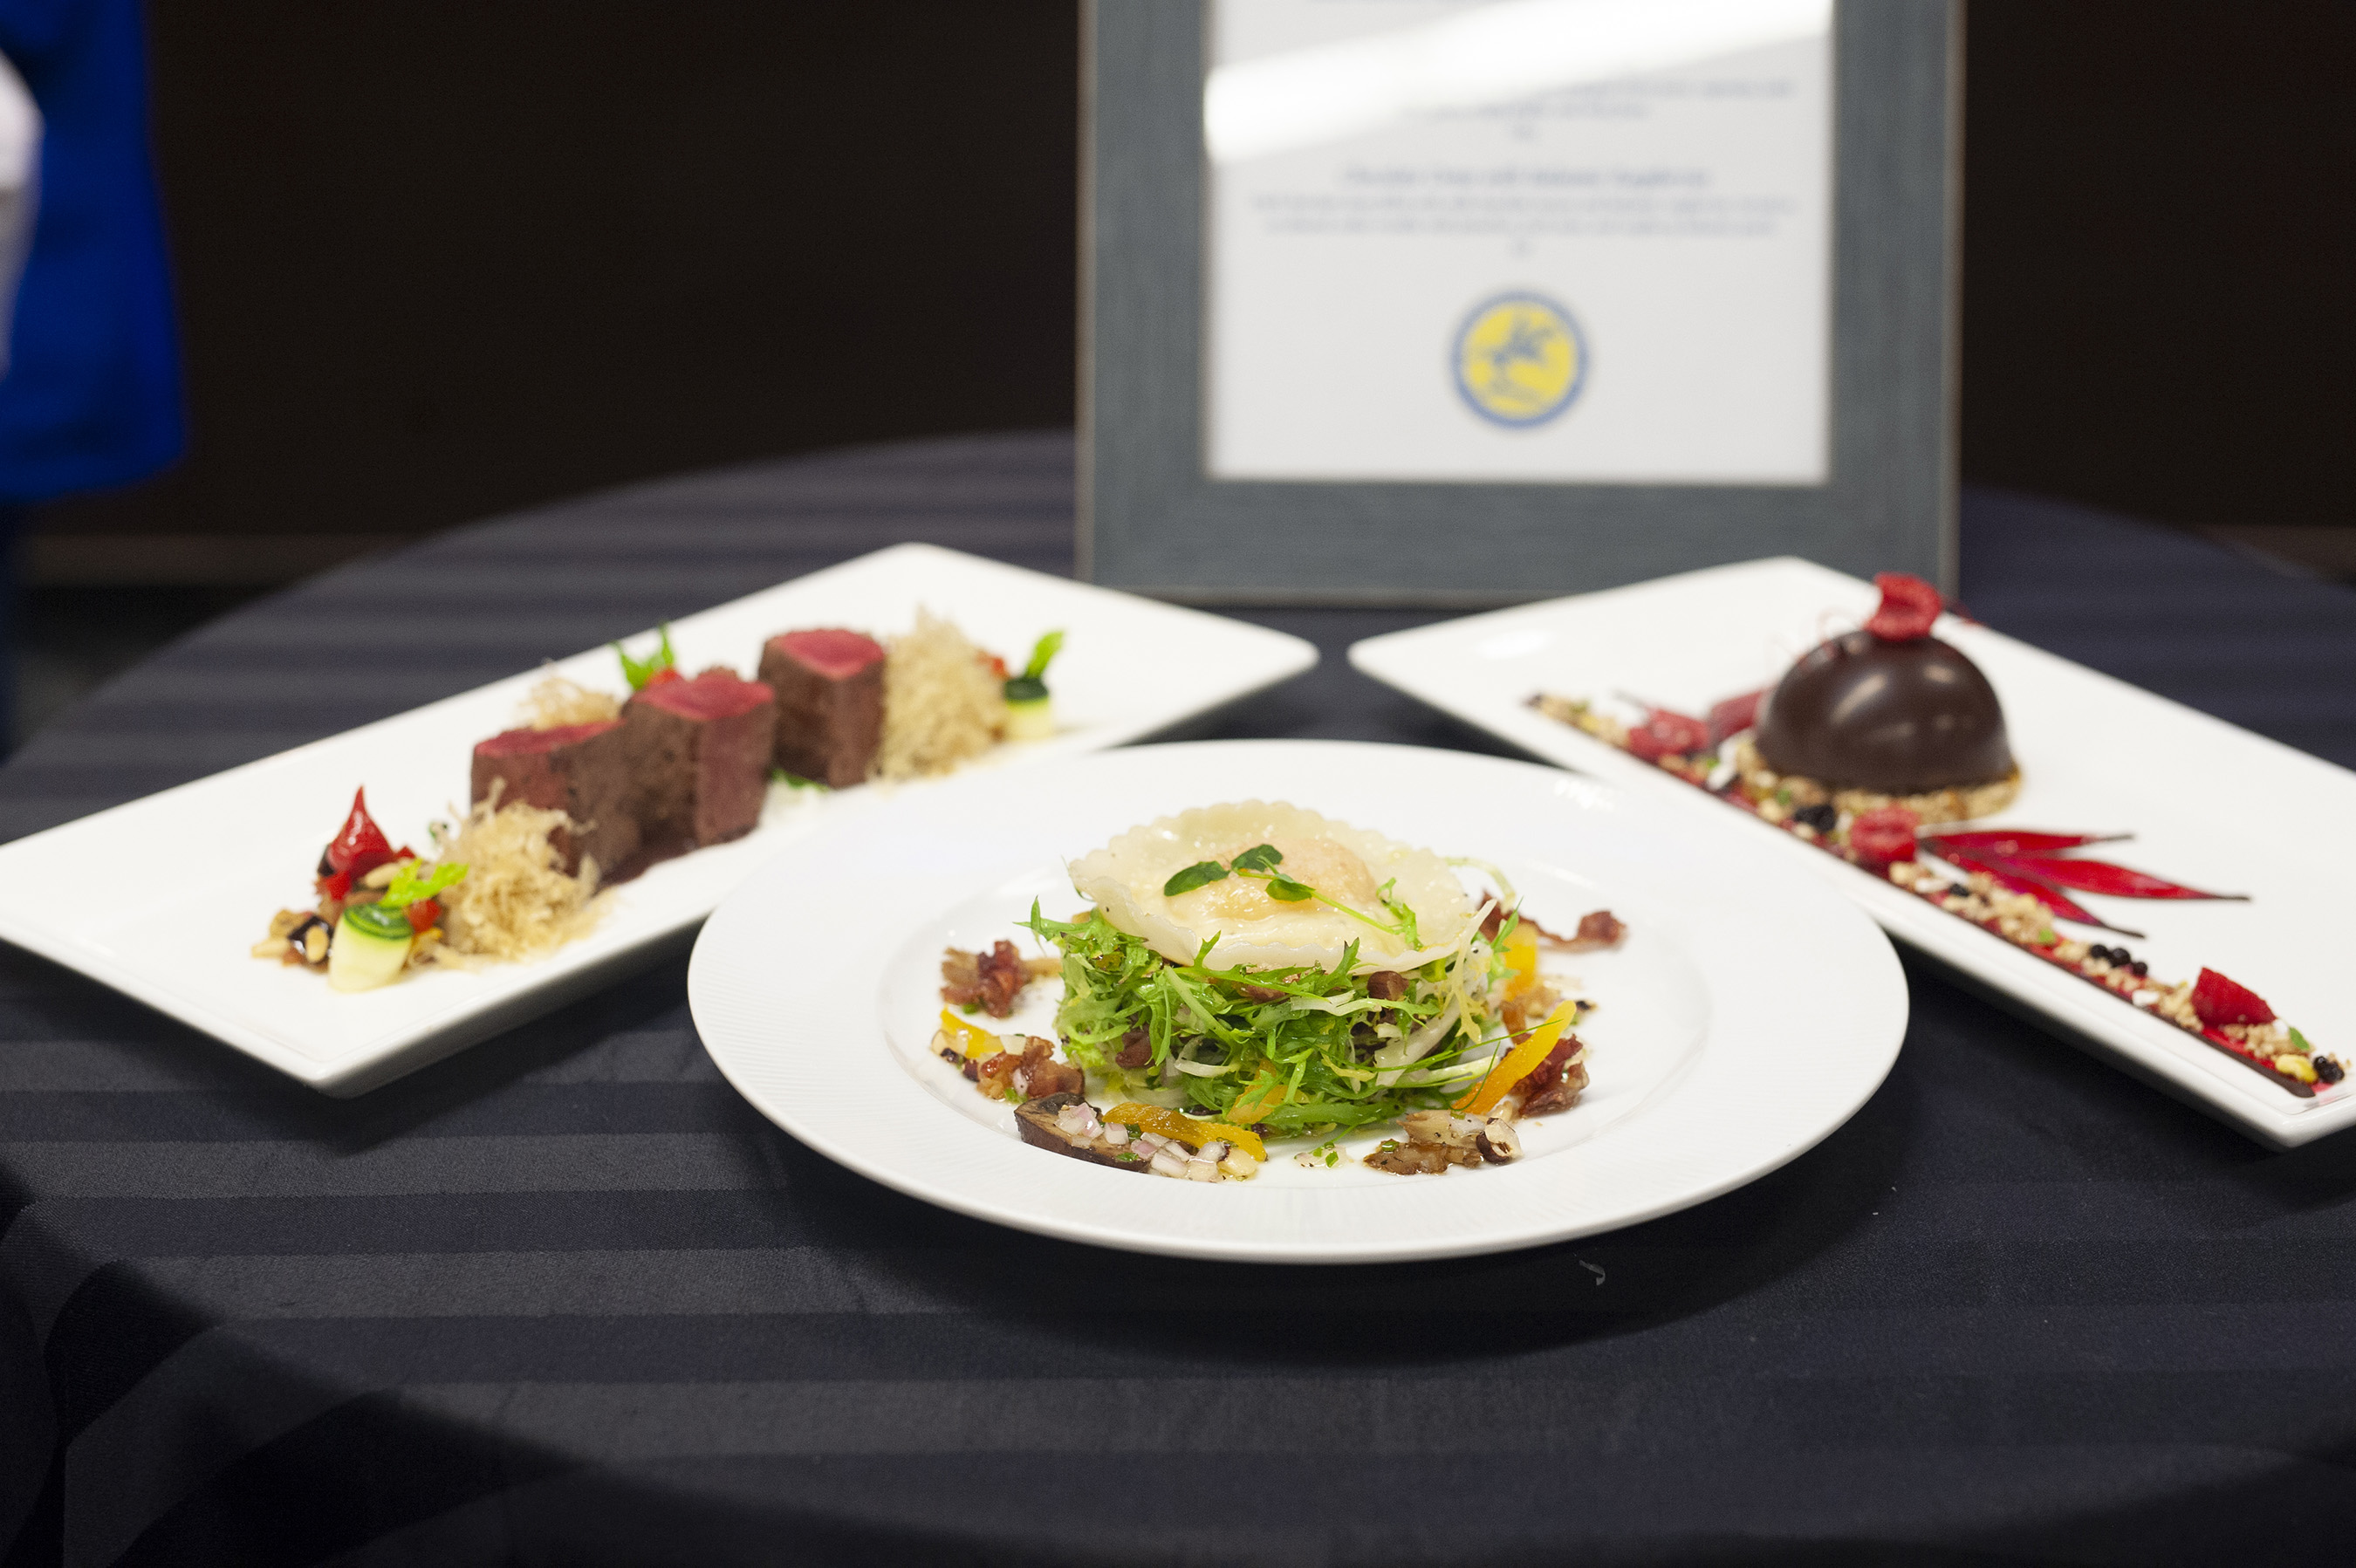 Caesar Rodney High School in Camden, Delaware, earned their top spot in the culinary competition with a menu featuring flavors from France, Italy and Greece that included frisée salad with egg yolk ravioli, Mediterranean lamb loin and chocolate dome with balsamic raspberries.